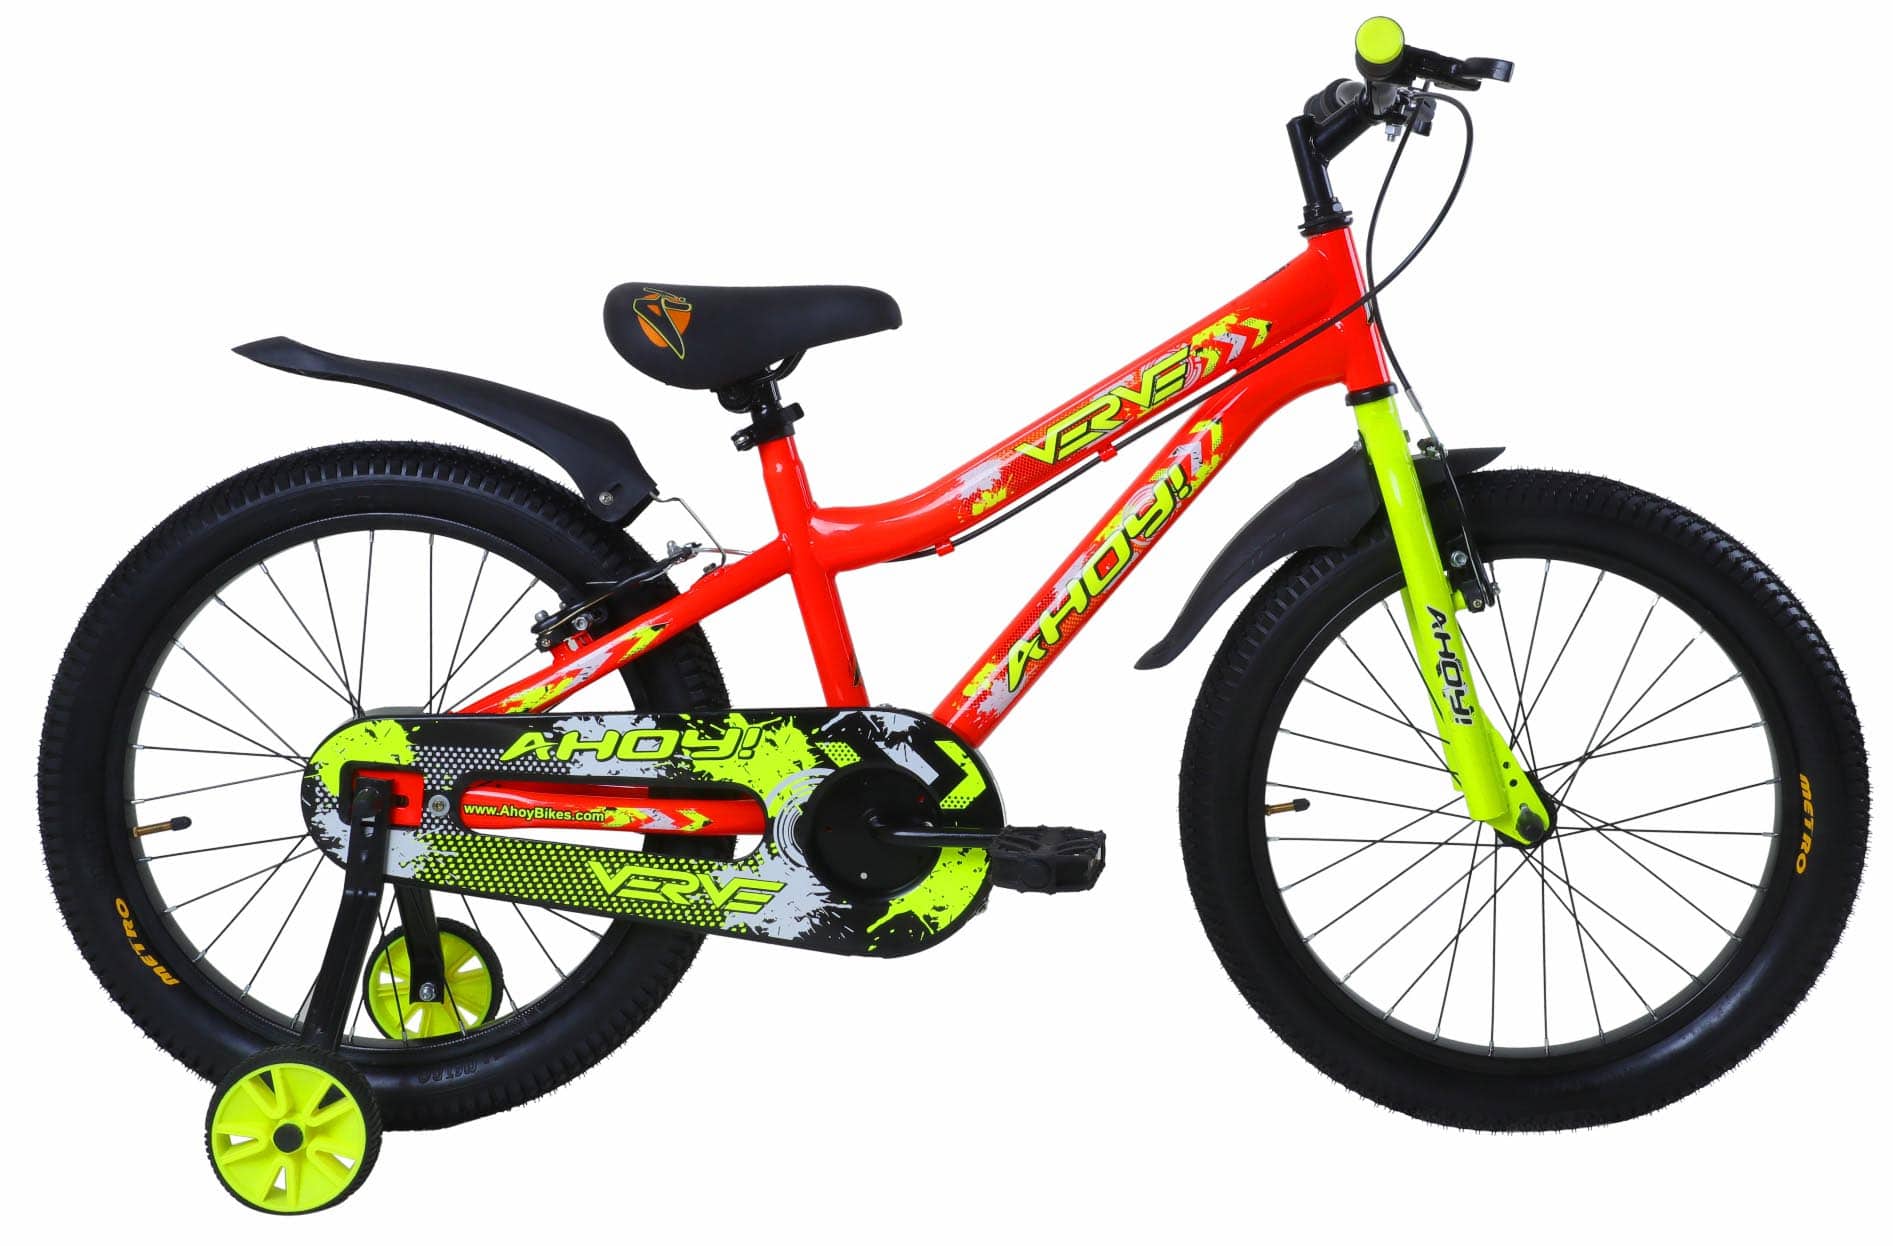 Verve Kids Bike 20T Single Speed | Buy Red Cycle Non Gear for Kids